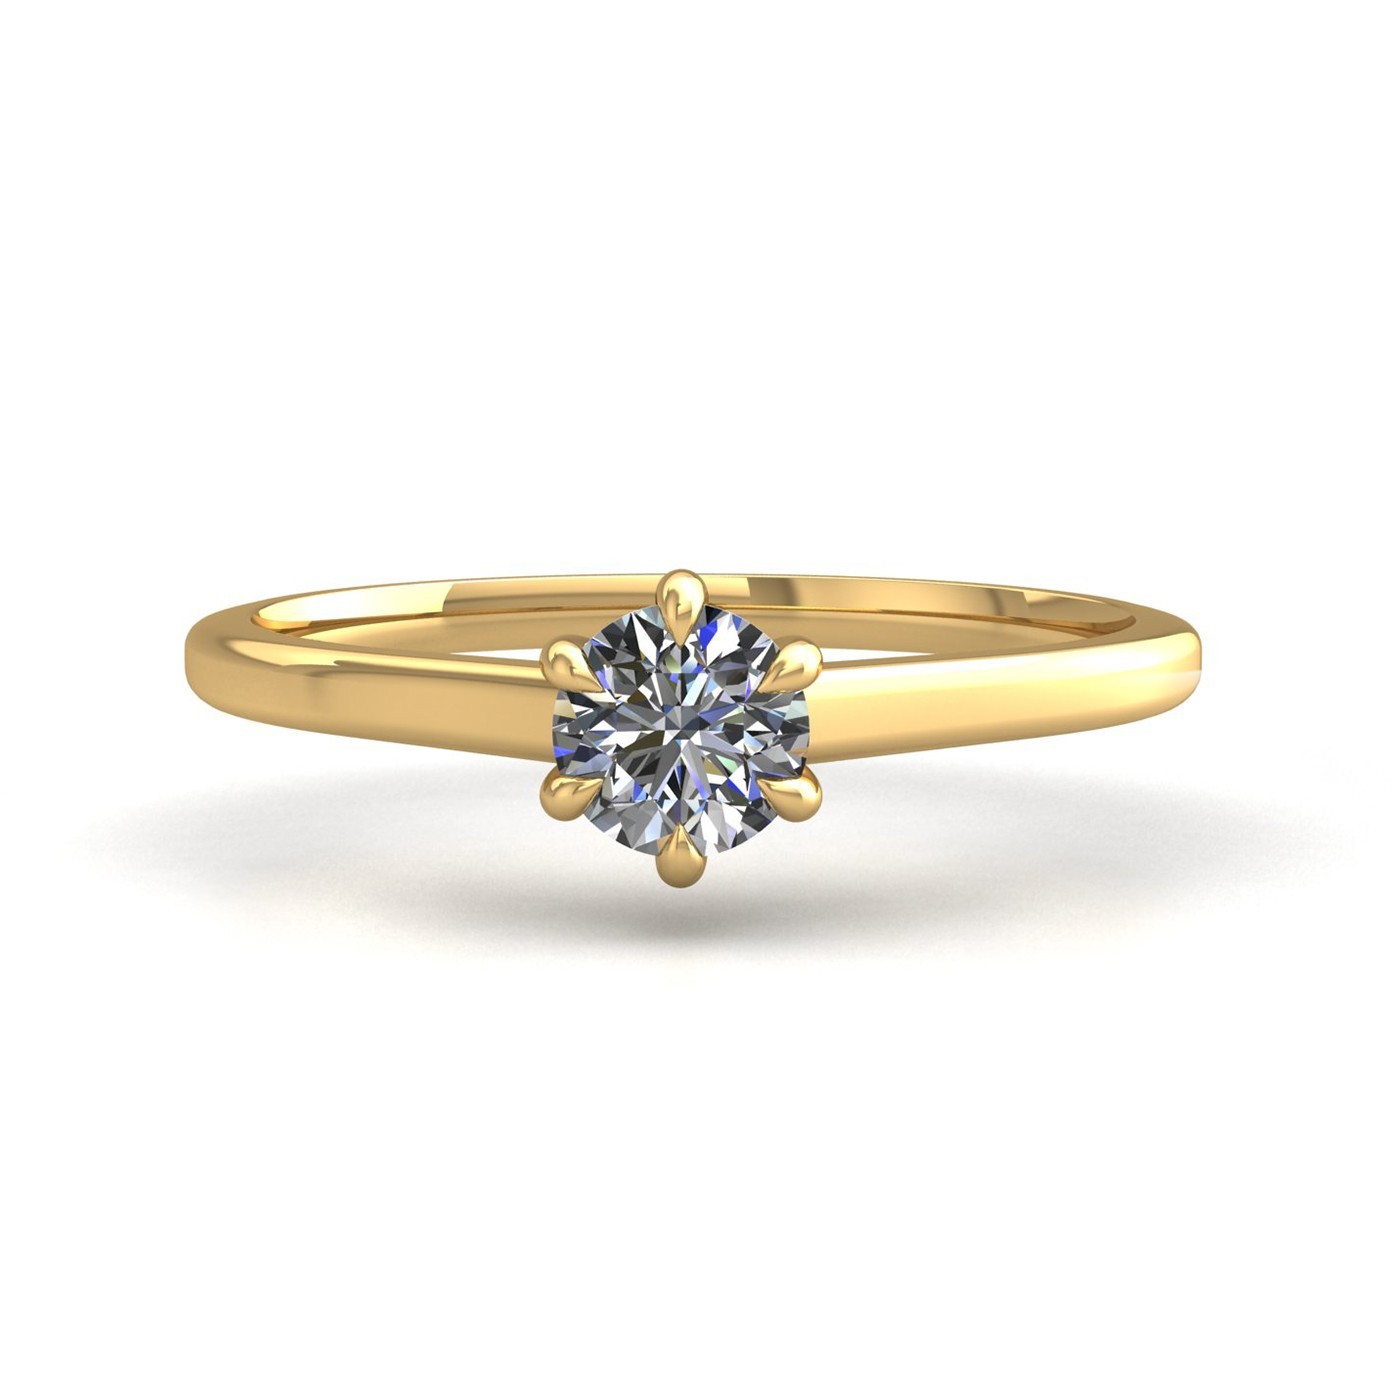 18k yellow gold 0,30 ct 6 prongs solitaire round cut diamond engagement ring with whisper thin band